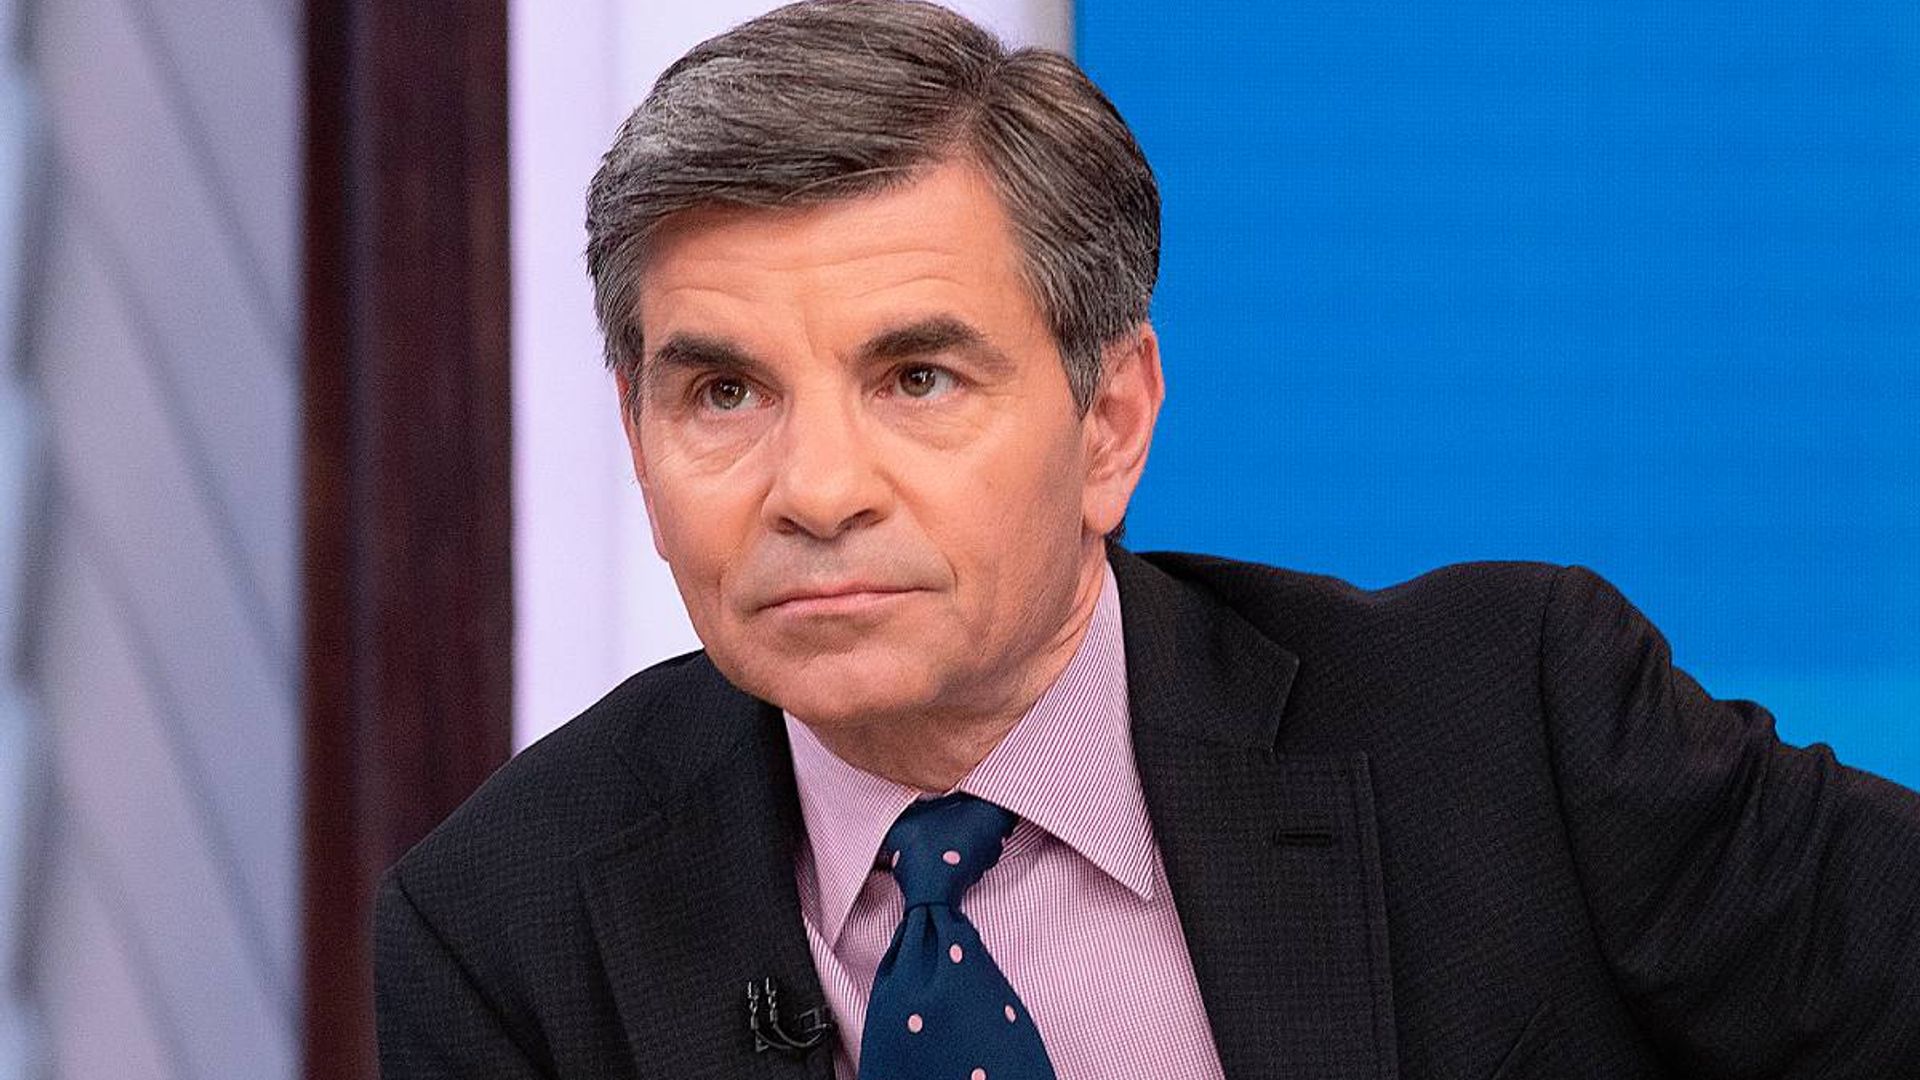 gma george stephanopoulos selfie sparks reaction